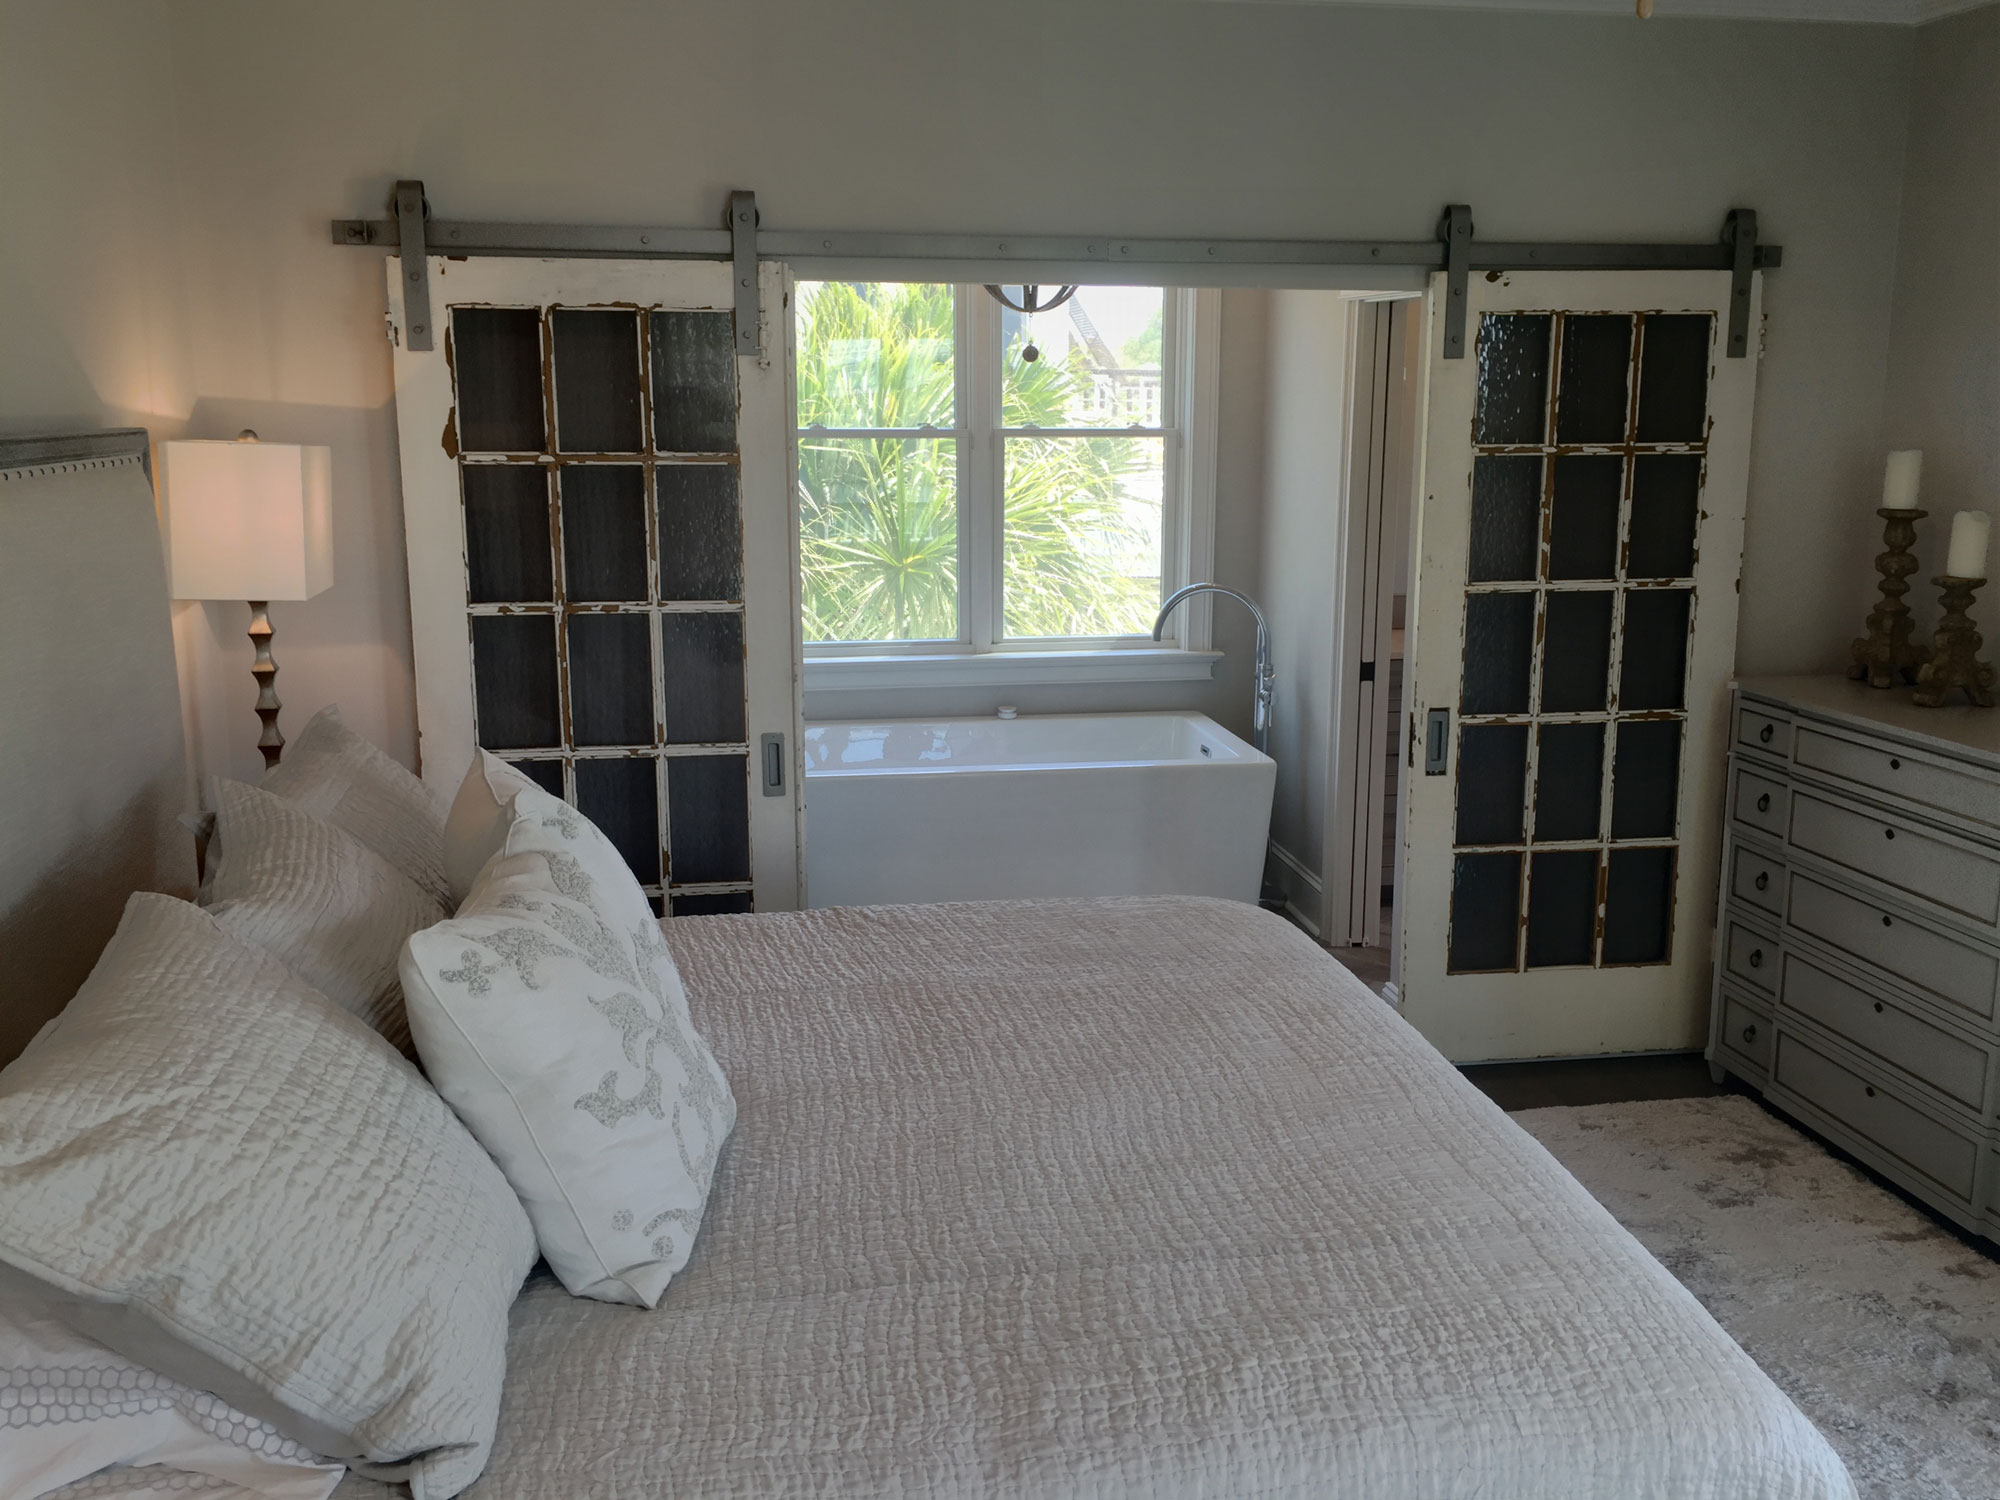 Salvaged doors open to master bath addition on balcony